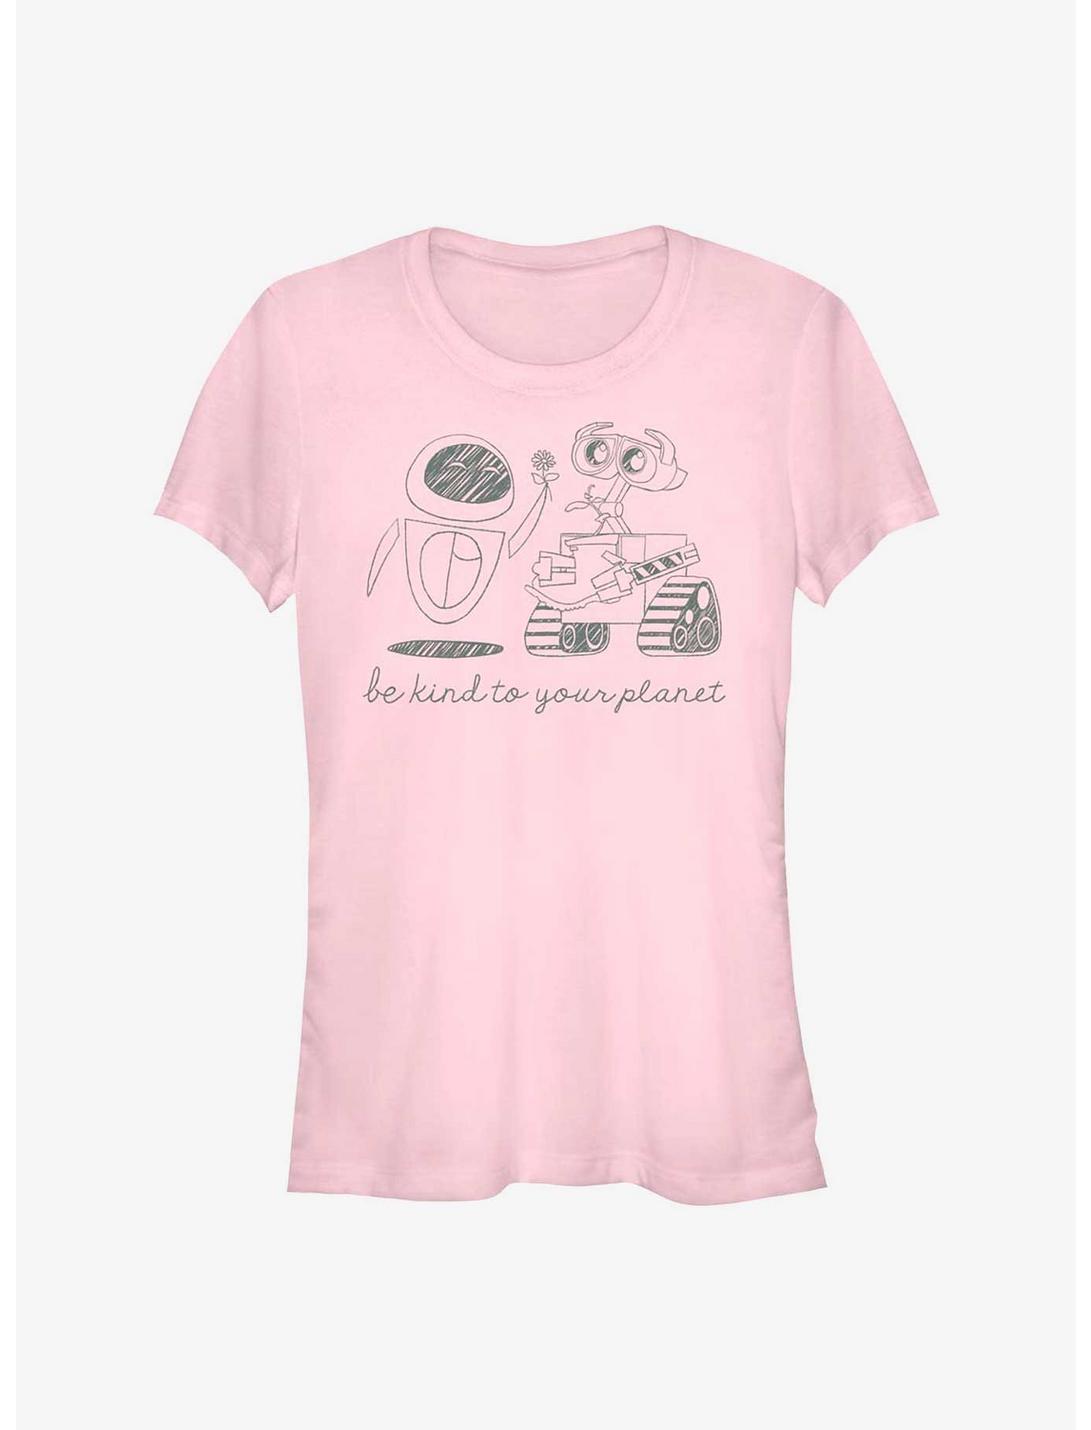 Disney Pixar Wall-E Earth Day Be Kind To Your Planet Girls T-Shirt, LIGHT PINK, hi-res